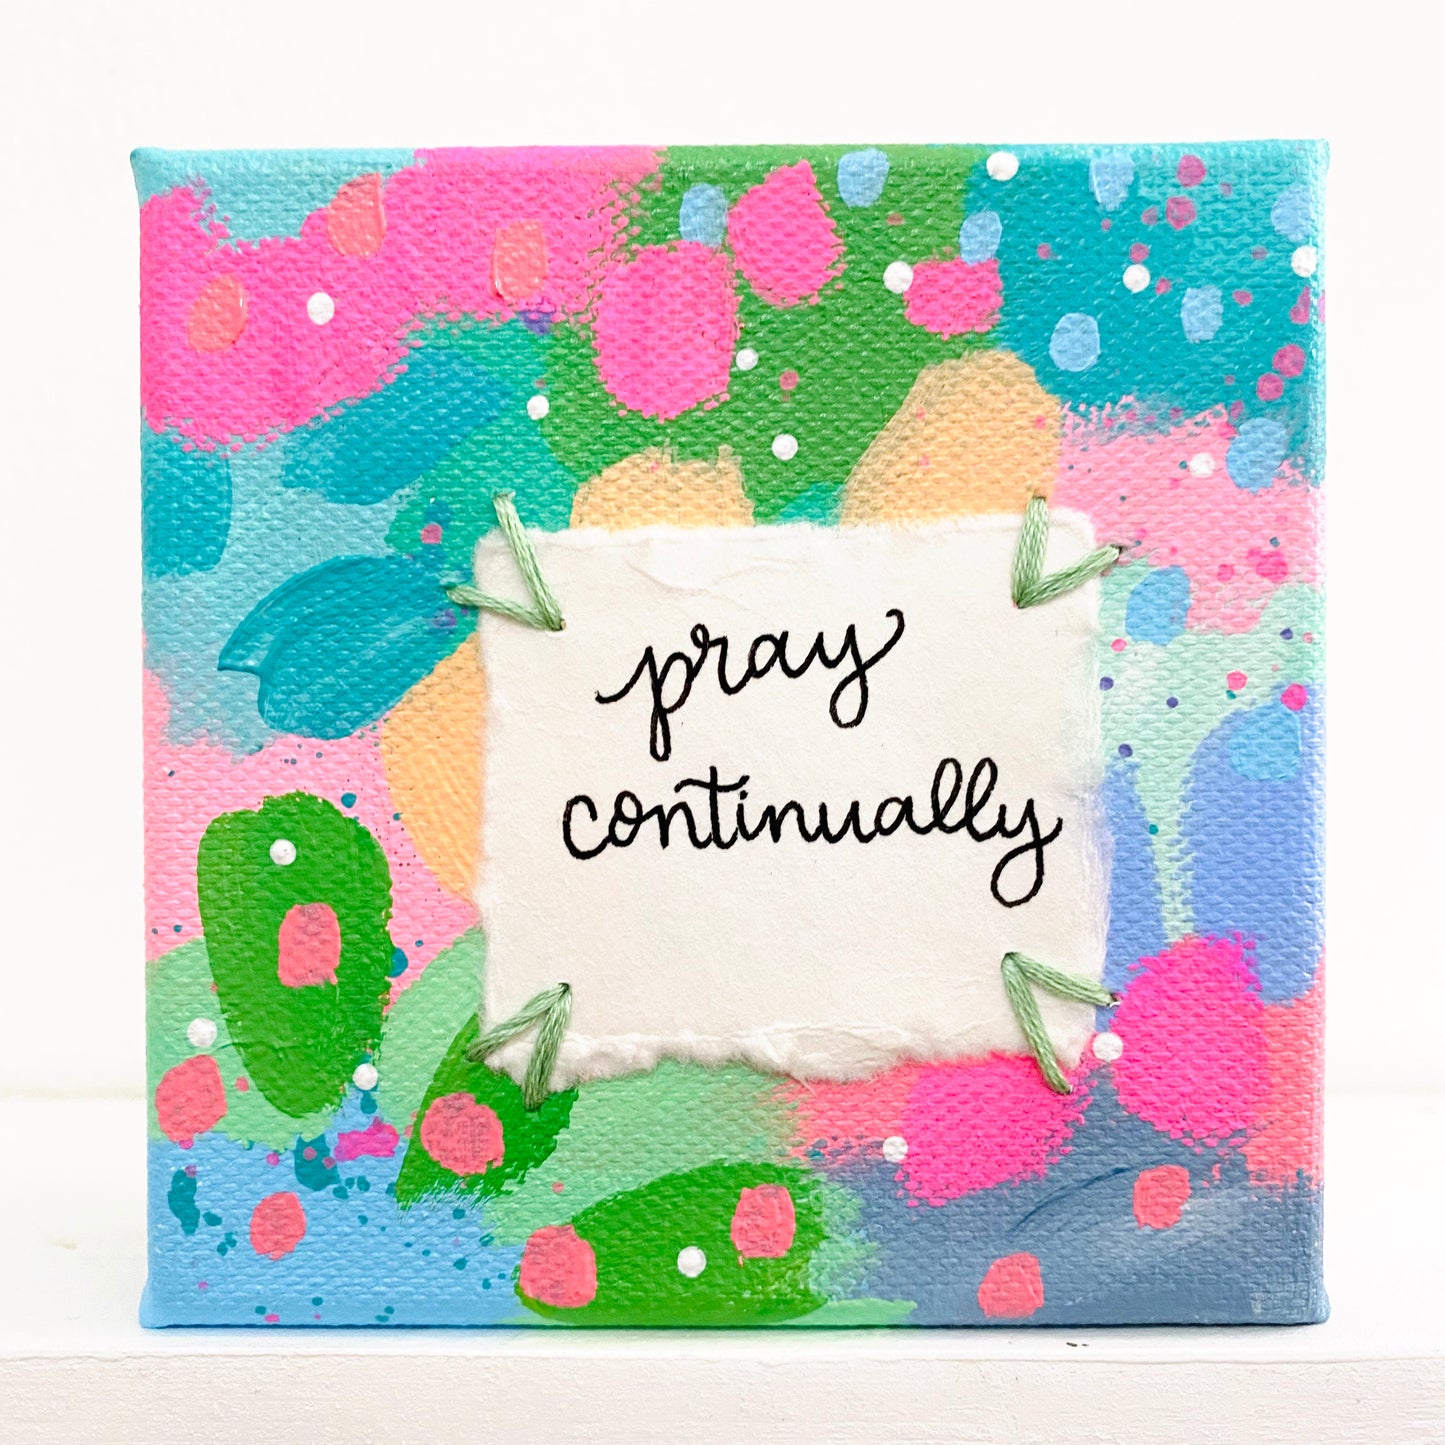 Pray Continually 4x4 inch original abstract canvas with embroidery thread accents